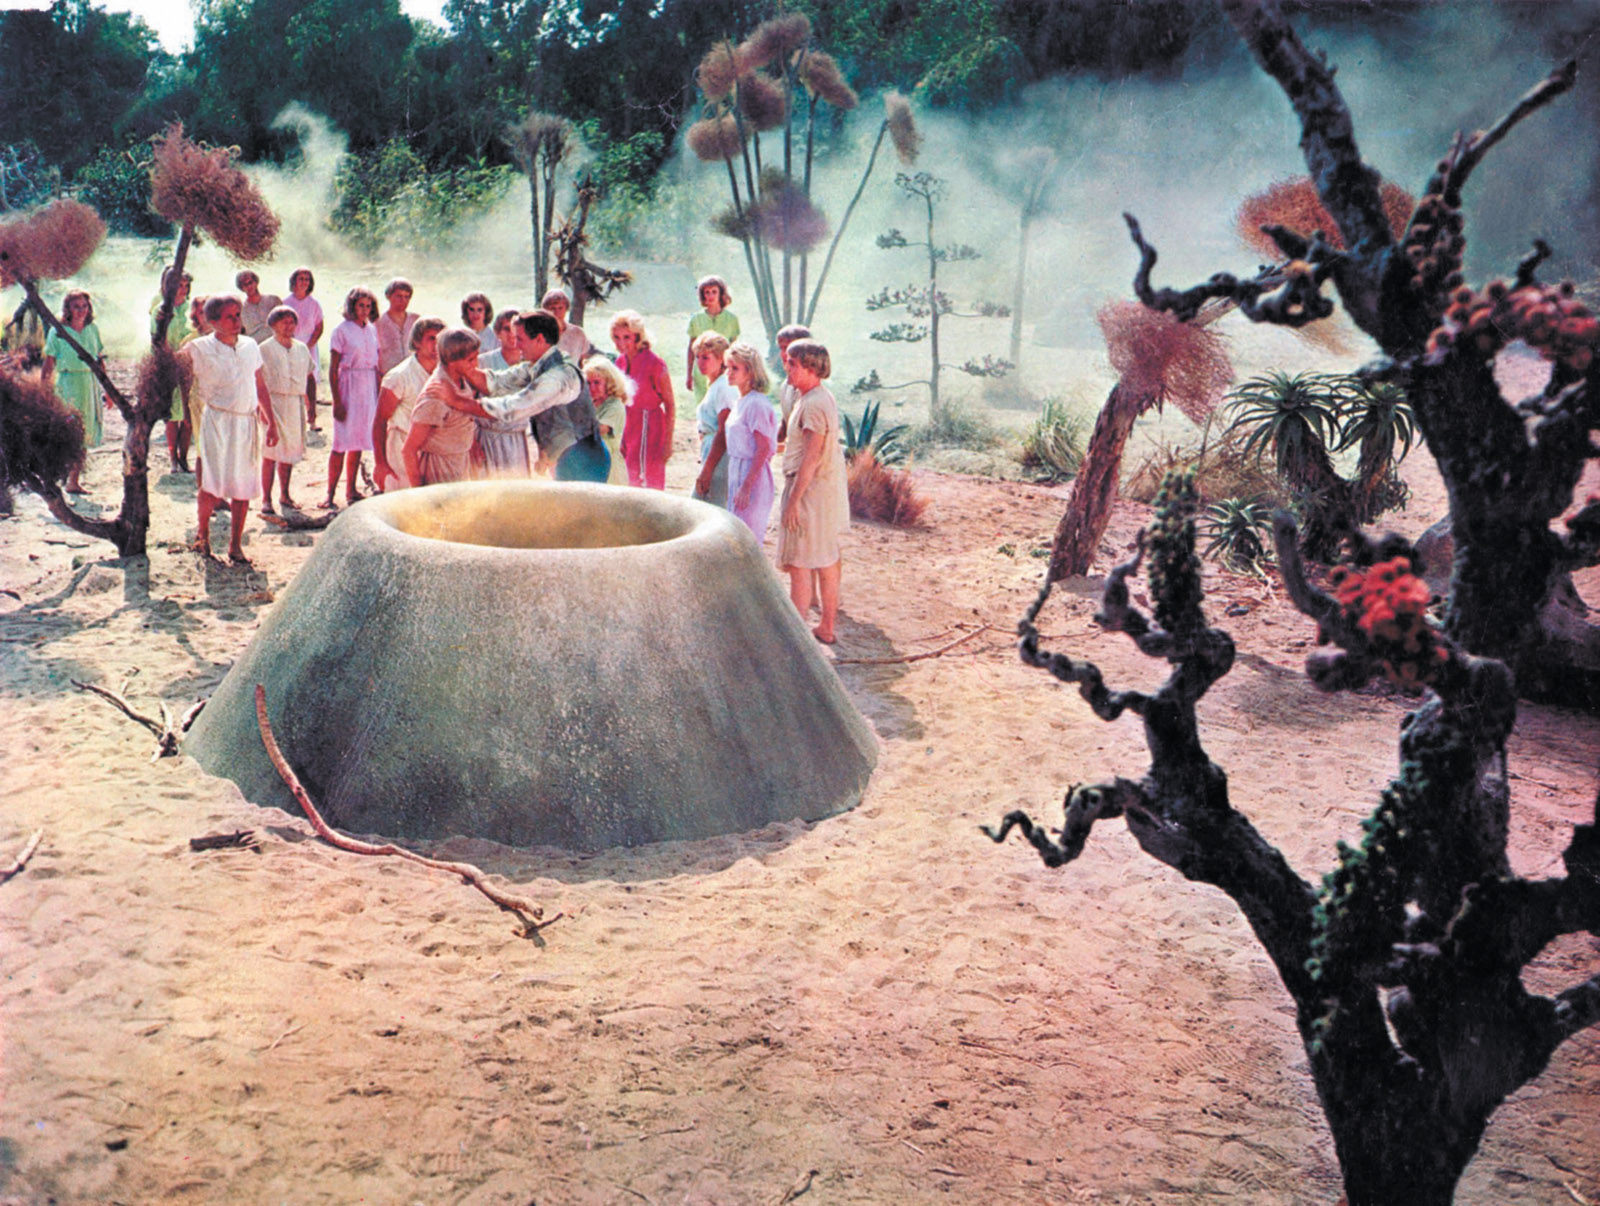 A scene from George Pal’s 1960 film adaptation of The Time Machine, based on H.G. Wells’s 1895 novel